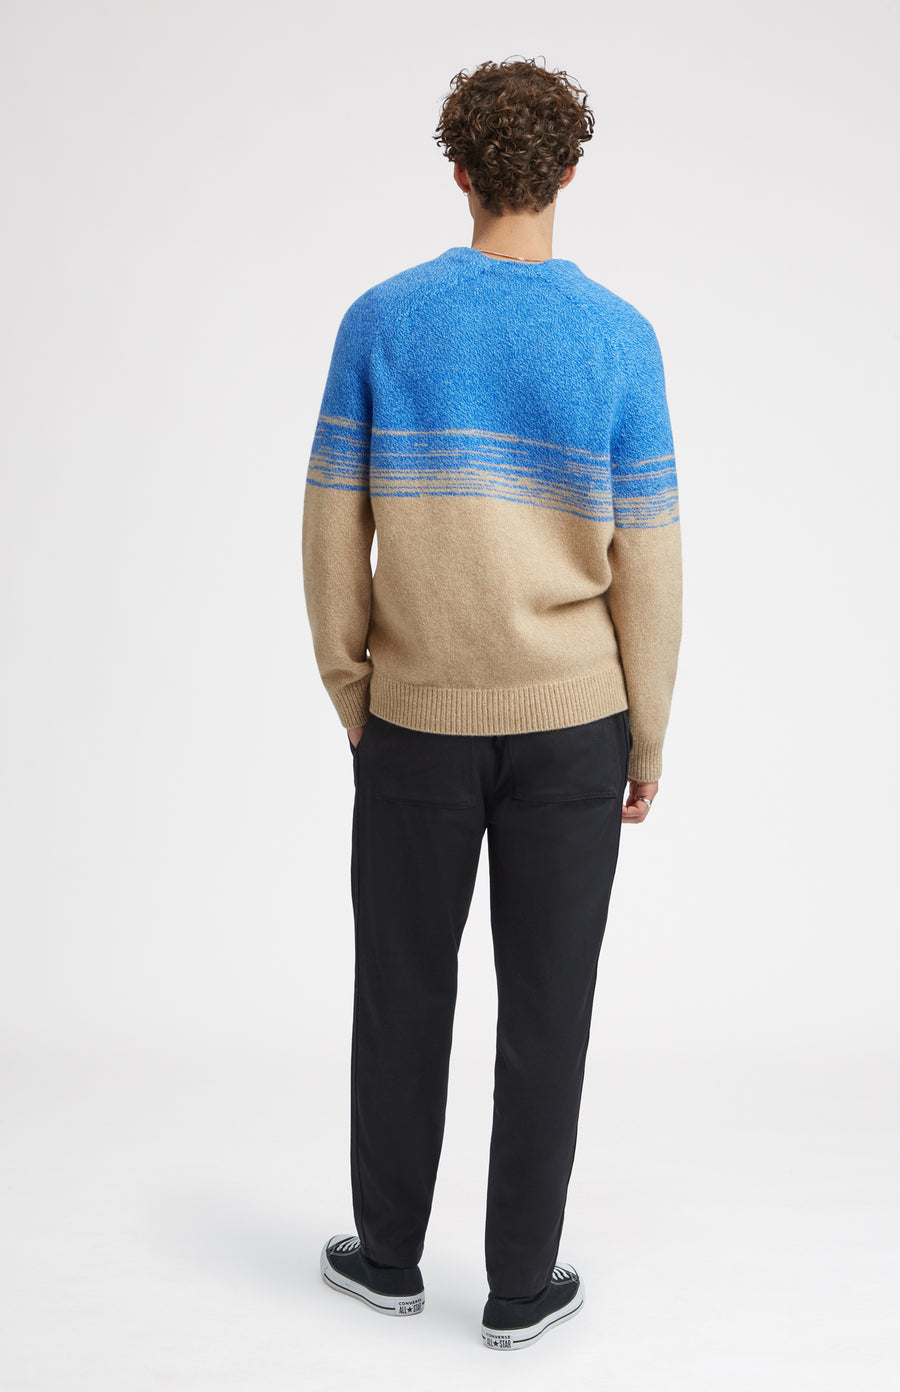 Lambswool V Neck Cardigan in Cobalt and Camel rear view - Pringle of Scotland 